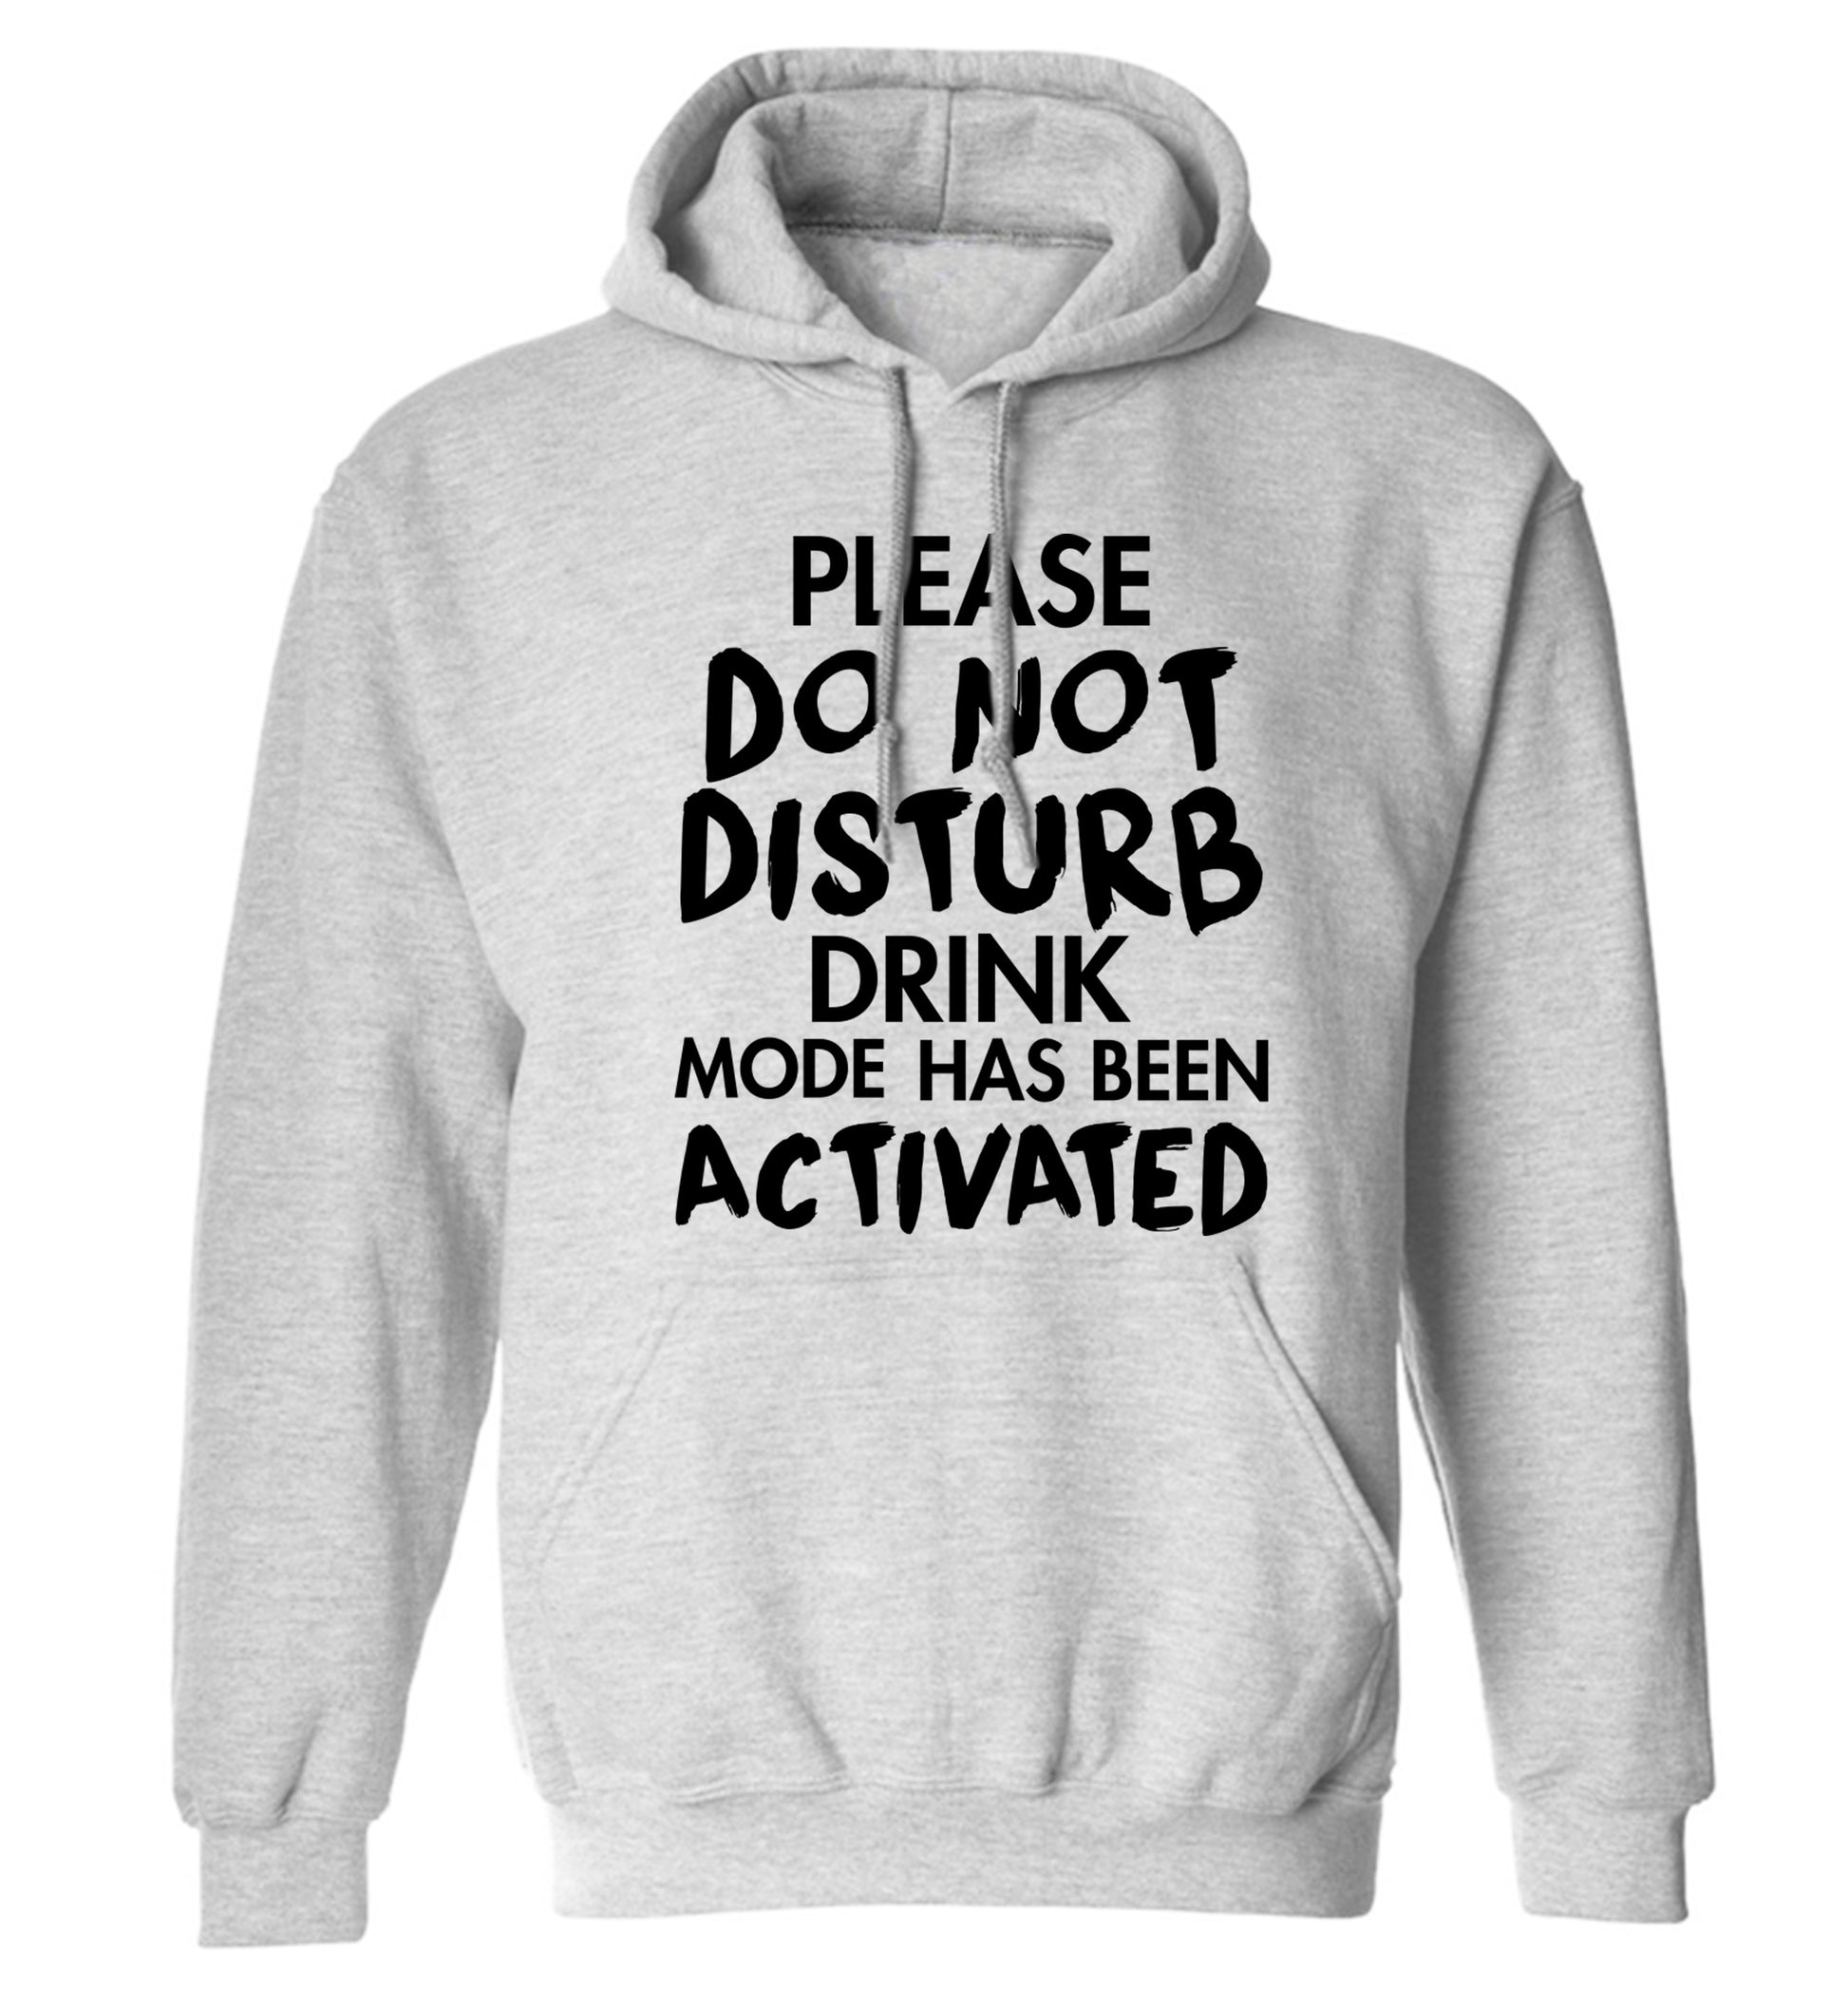 Please do not disturb drink mode has been activated adults unisex grey hoodie 2XL